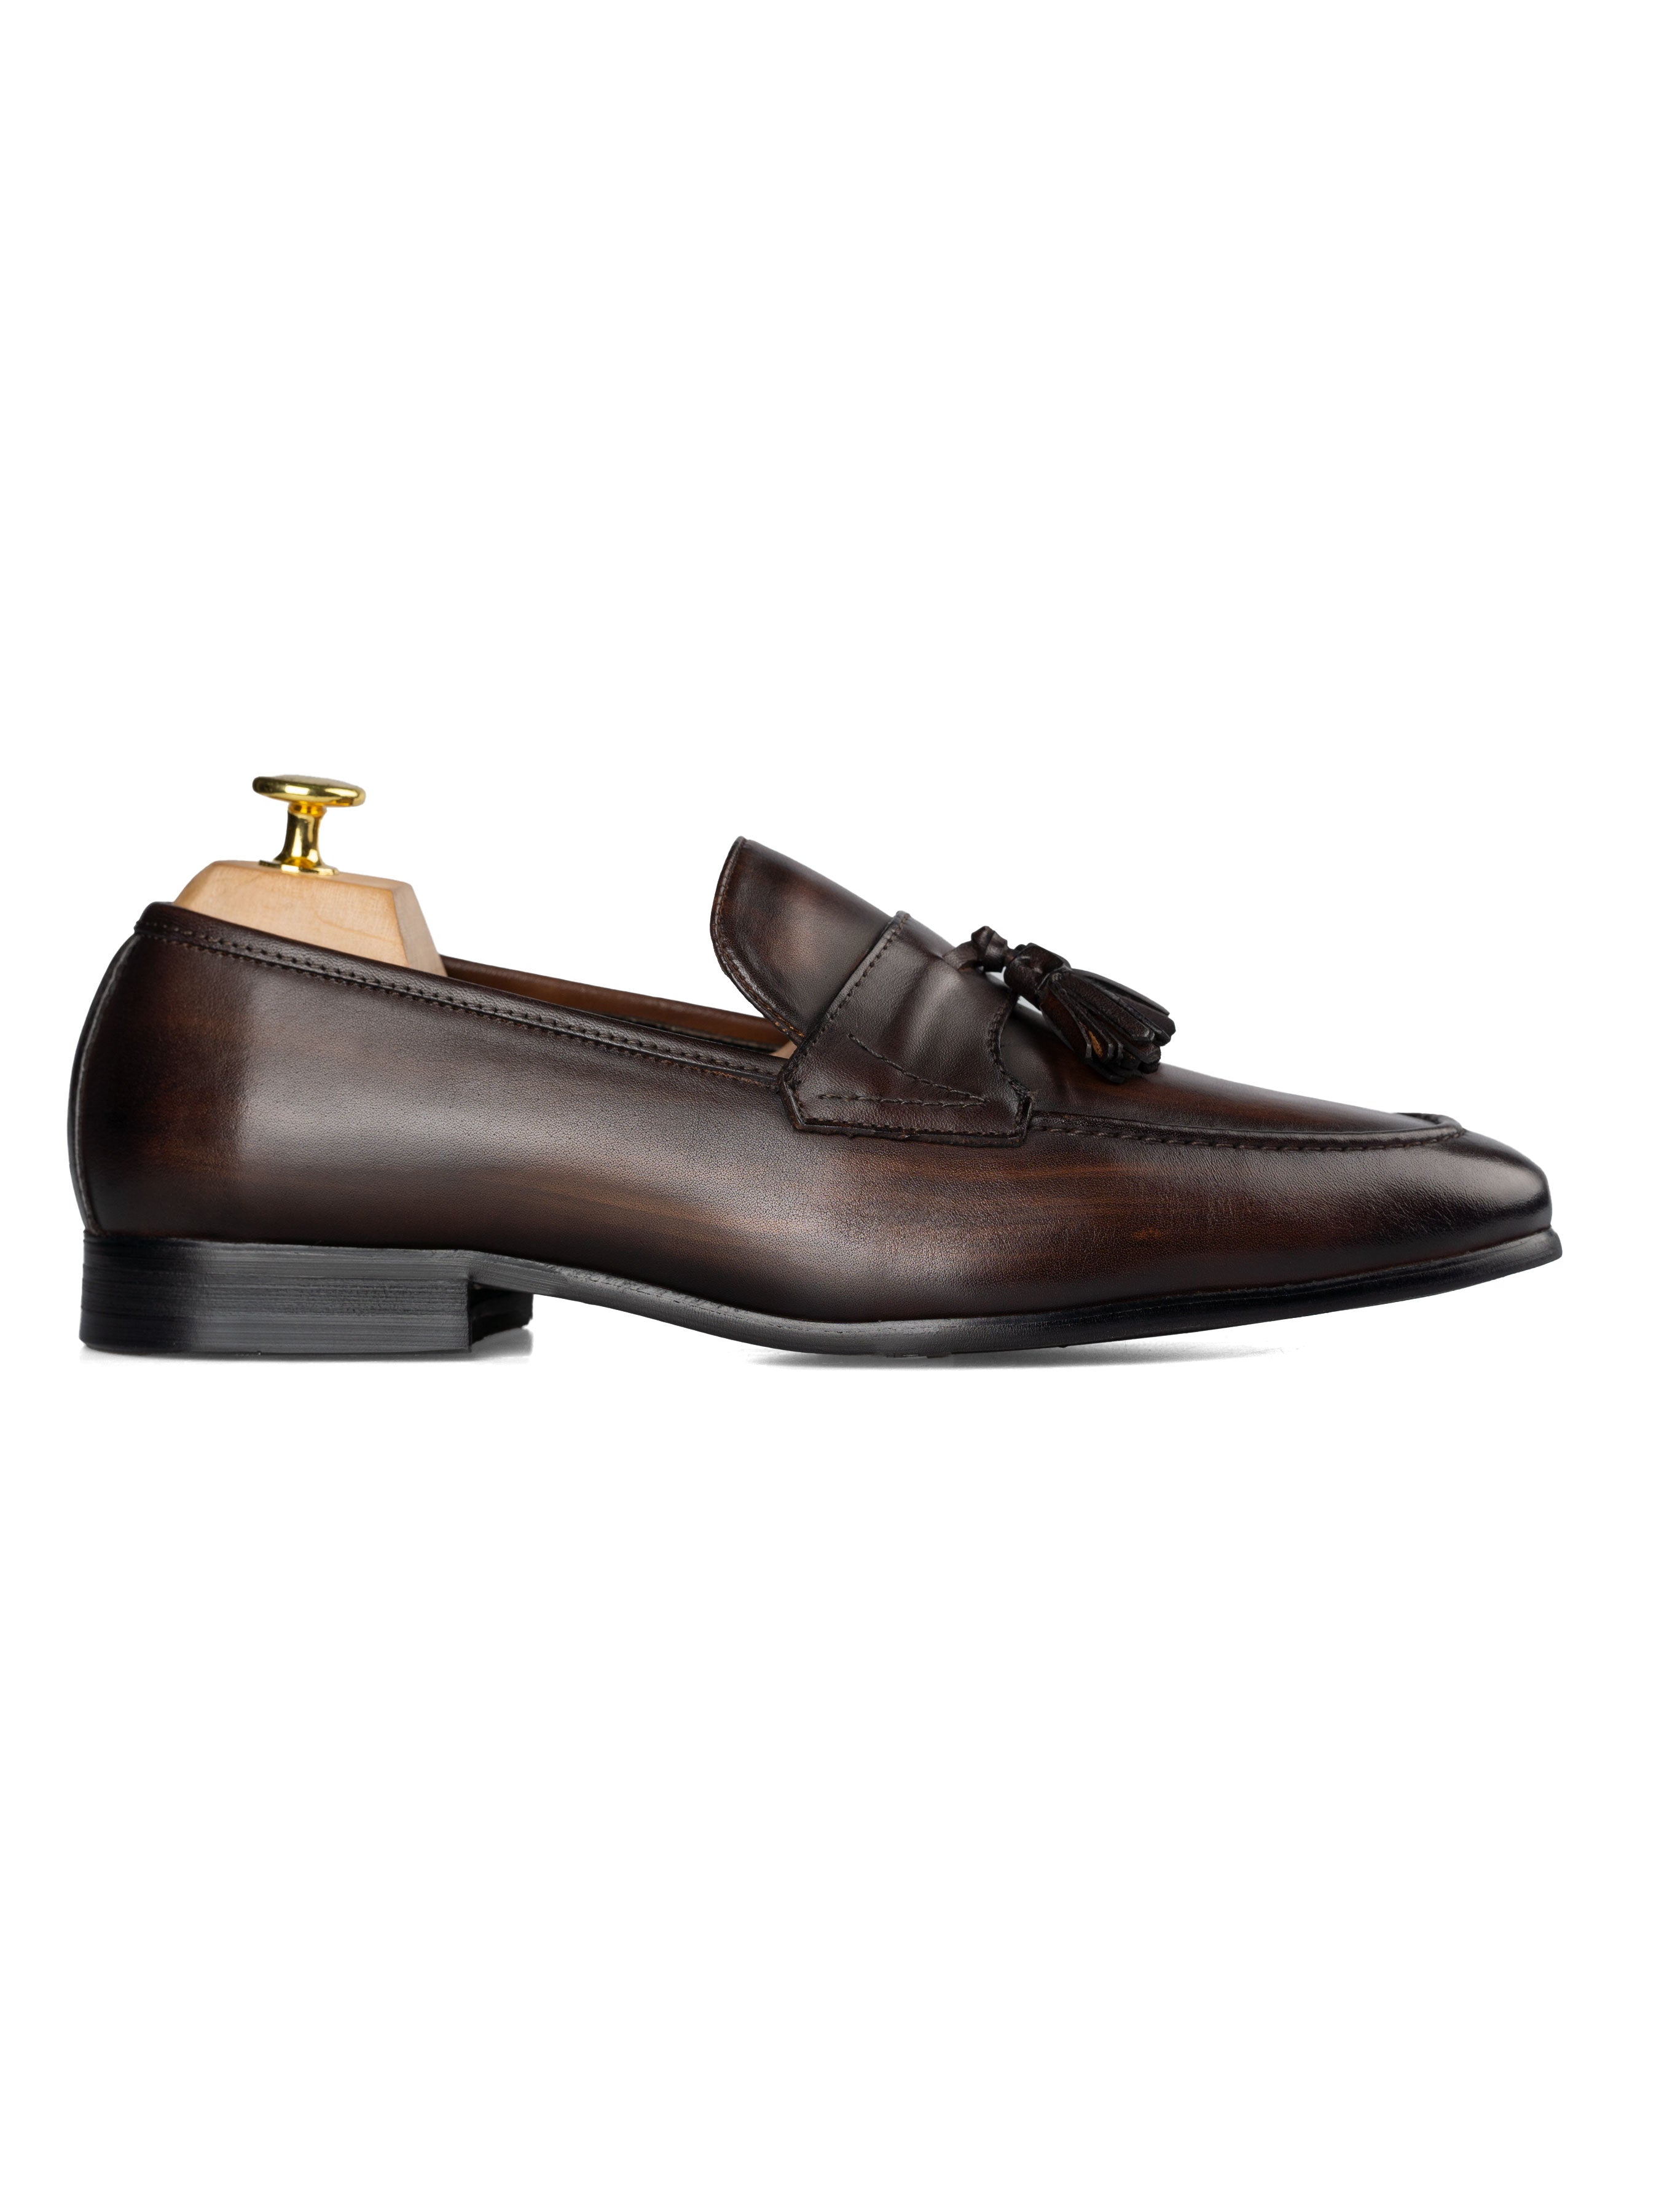 Tassel Loafer Wing Strap - Dark Brown (Hand Painted Patina) - Zeve Shoes